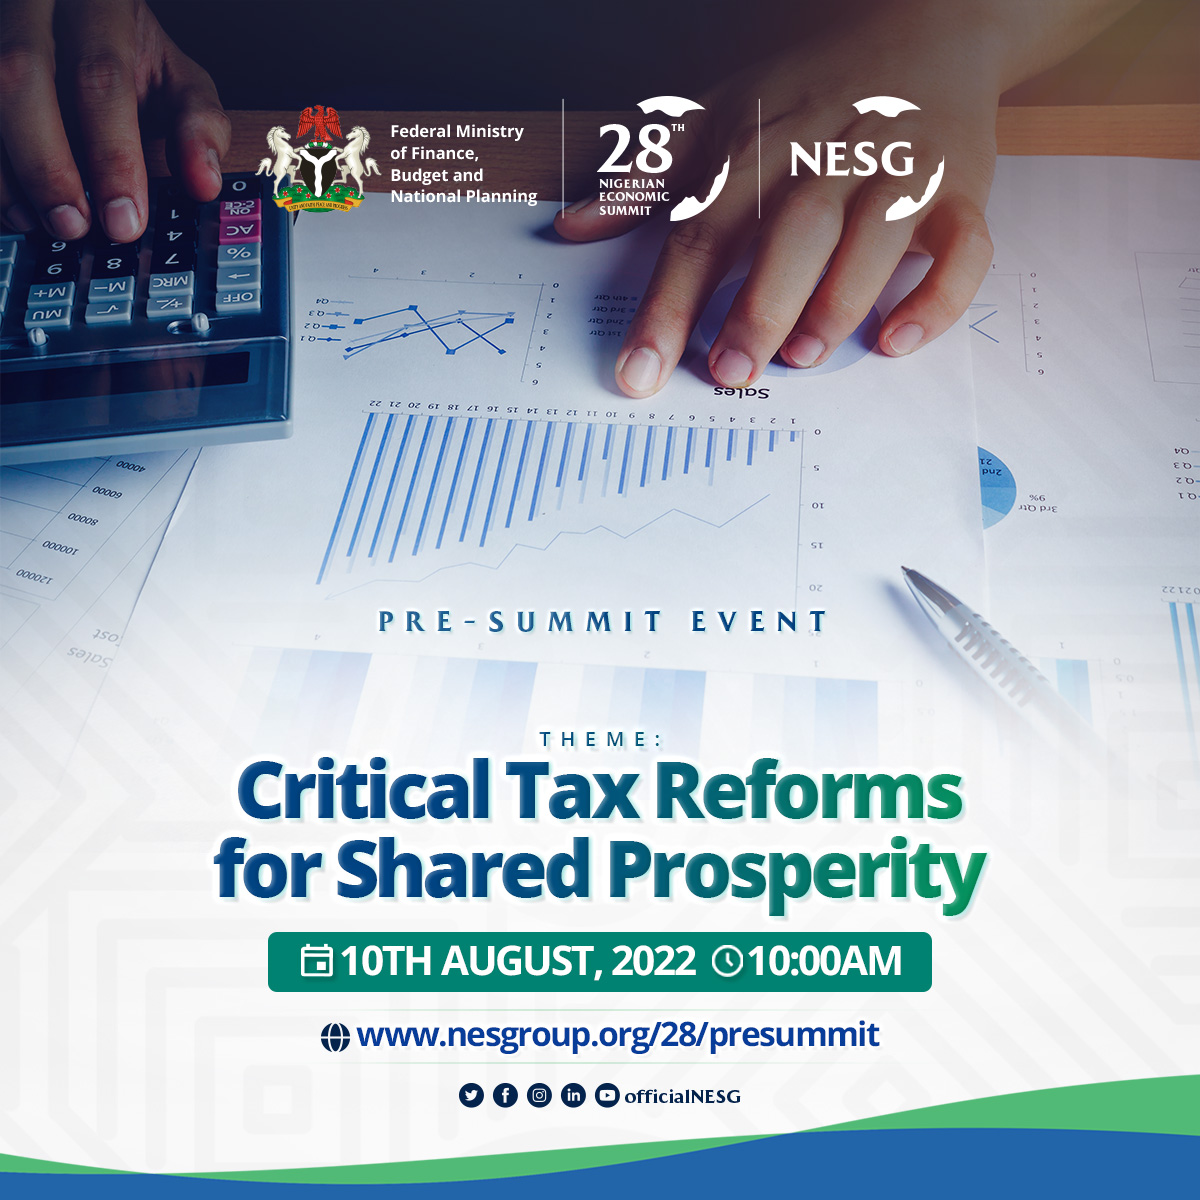 #NES28 Presummit Event: Critical Tax Reforms for Shared Prosperity